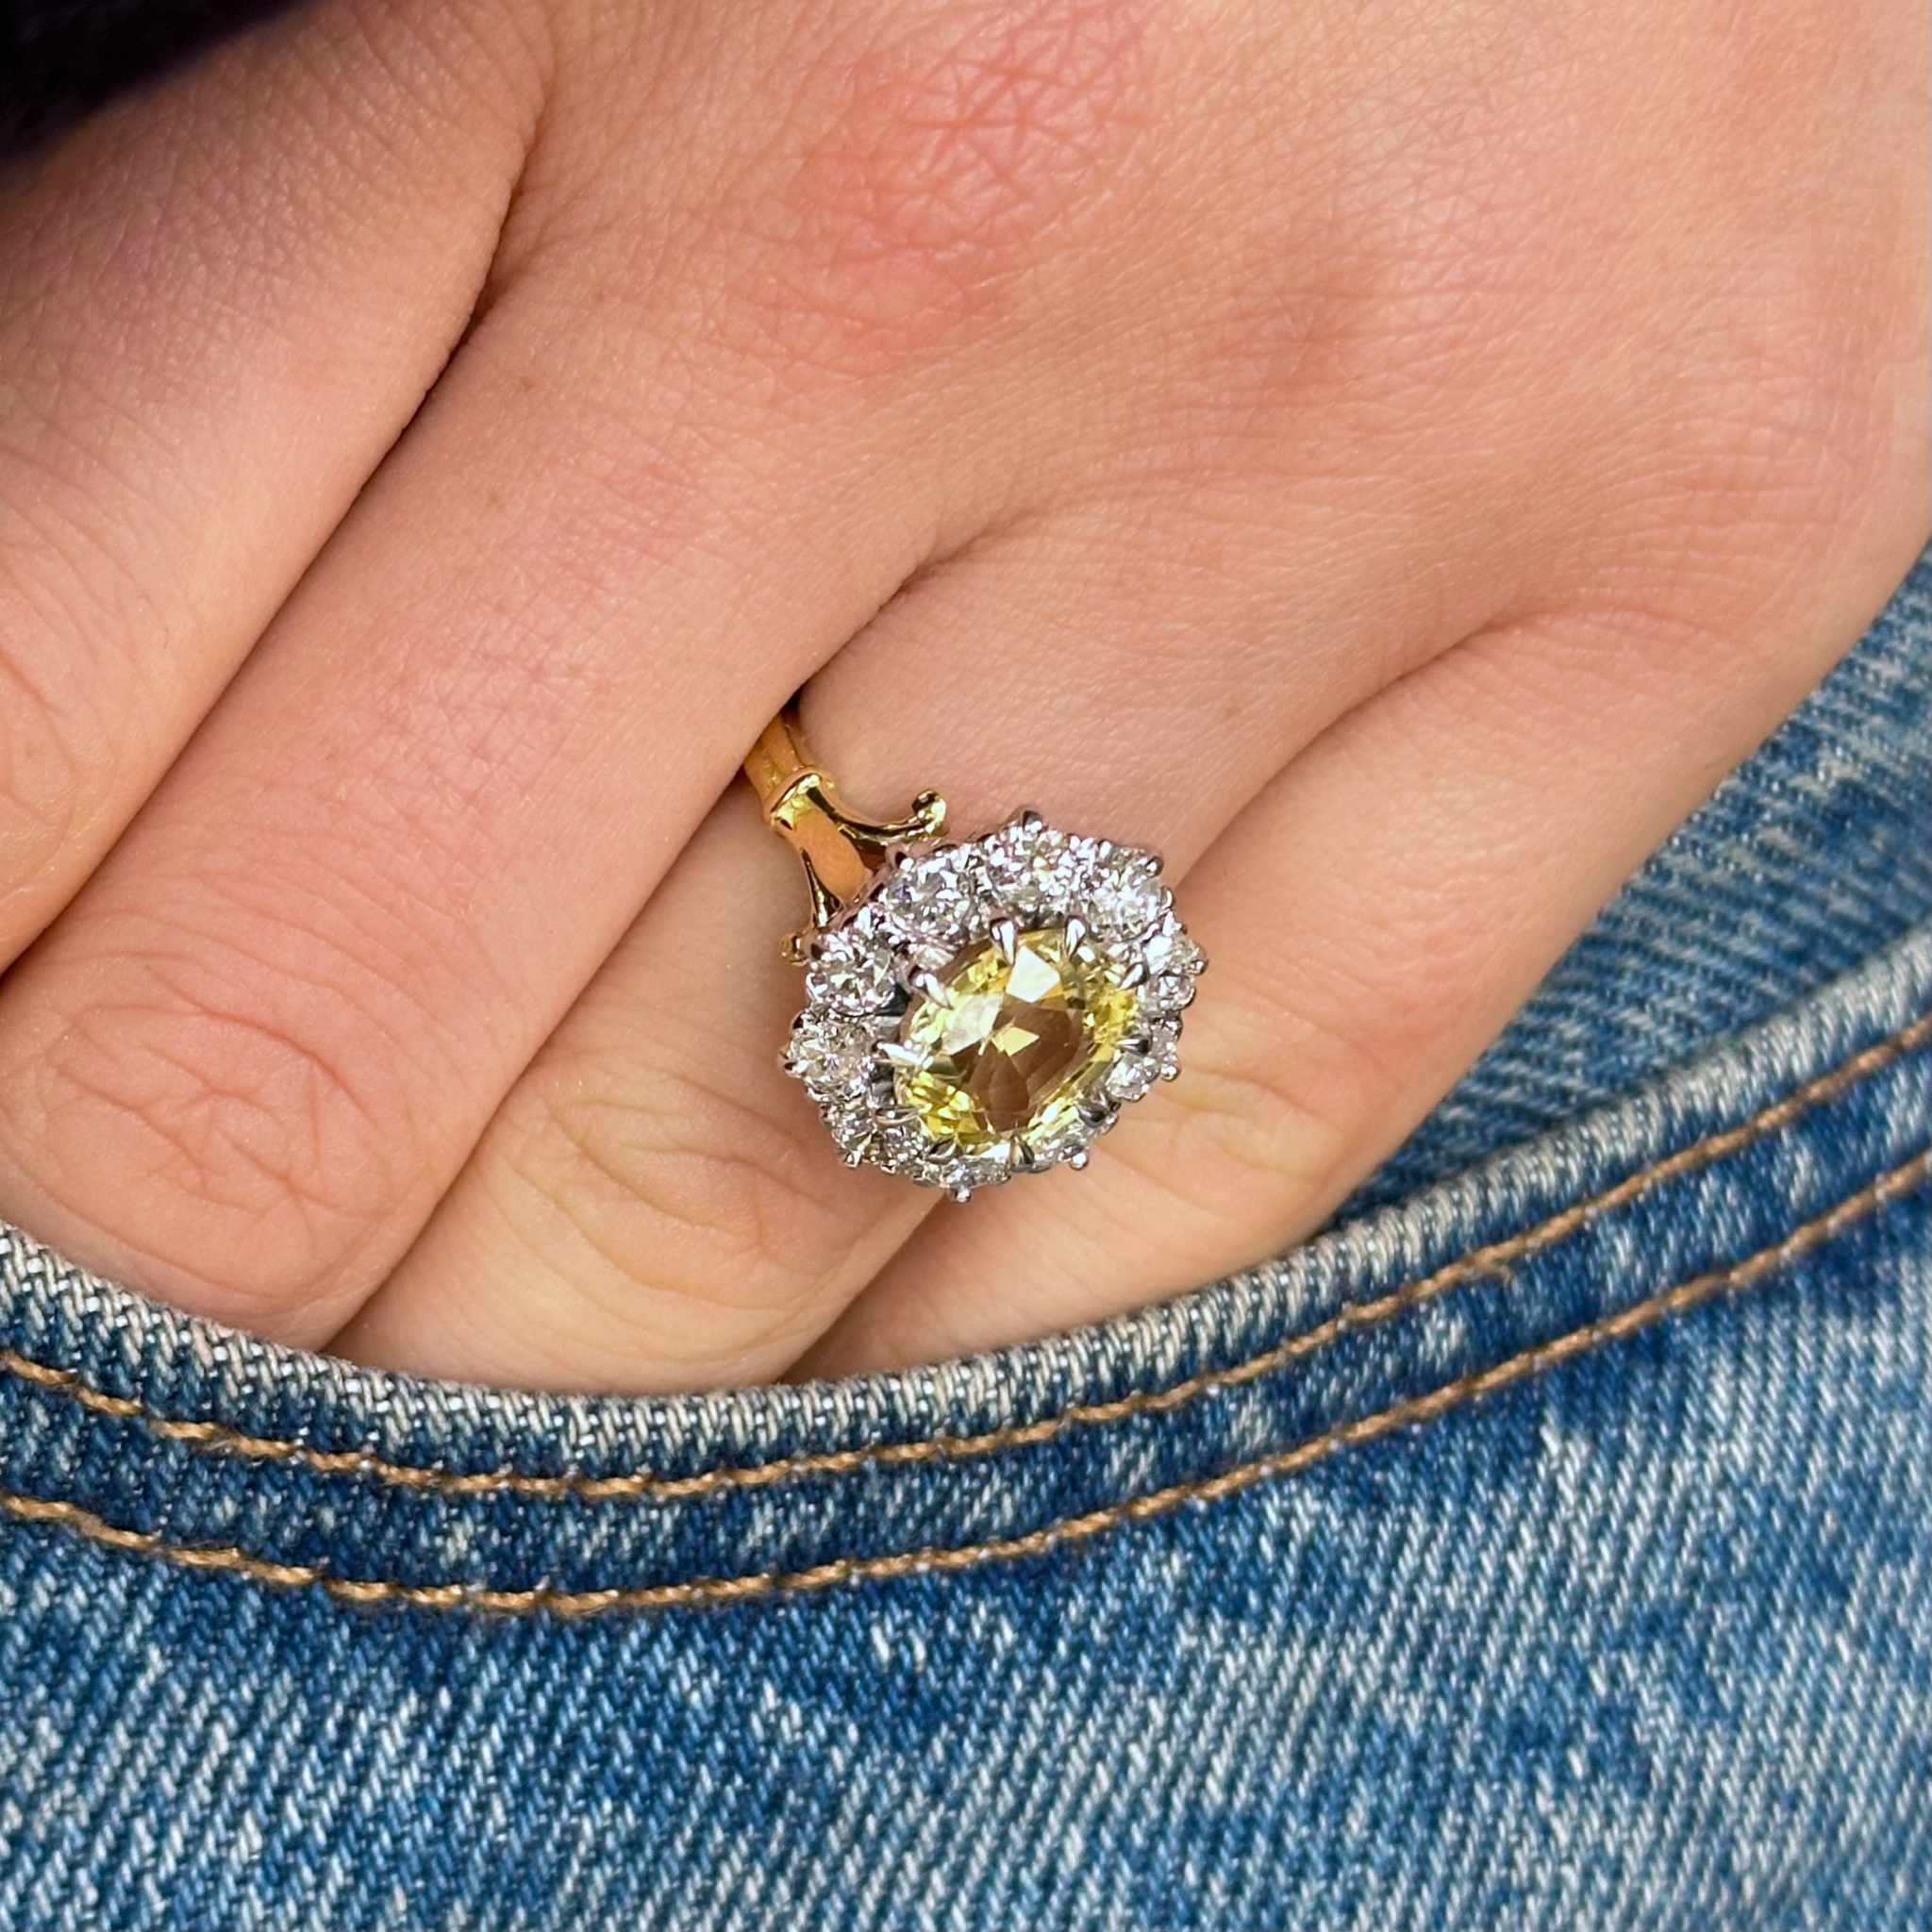 Antique, Victorian Yellow Sapphire and Diamond Ring, worn on hand in pocket of jeans.